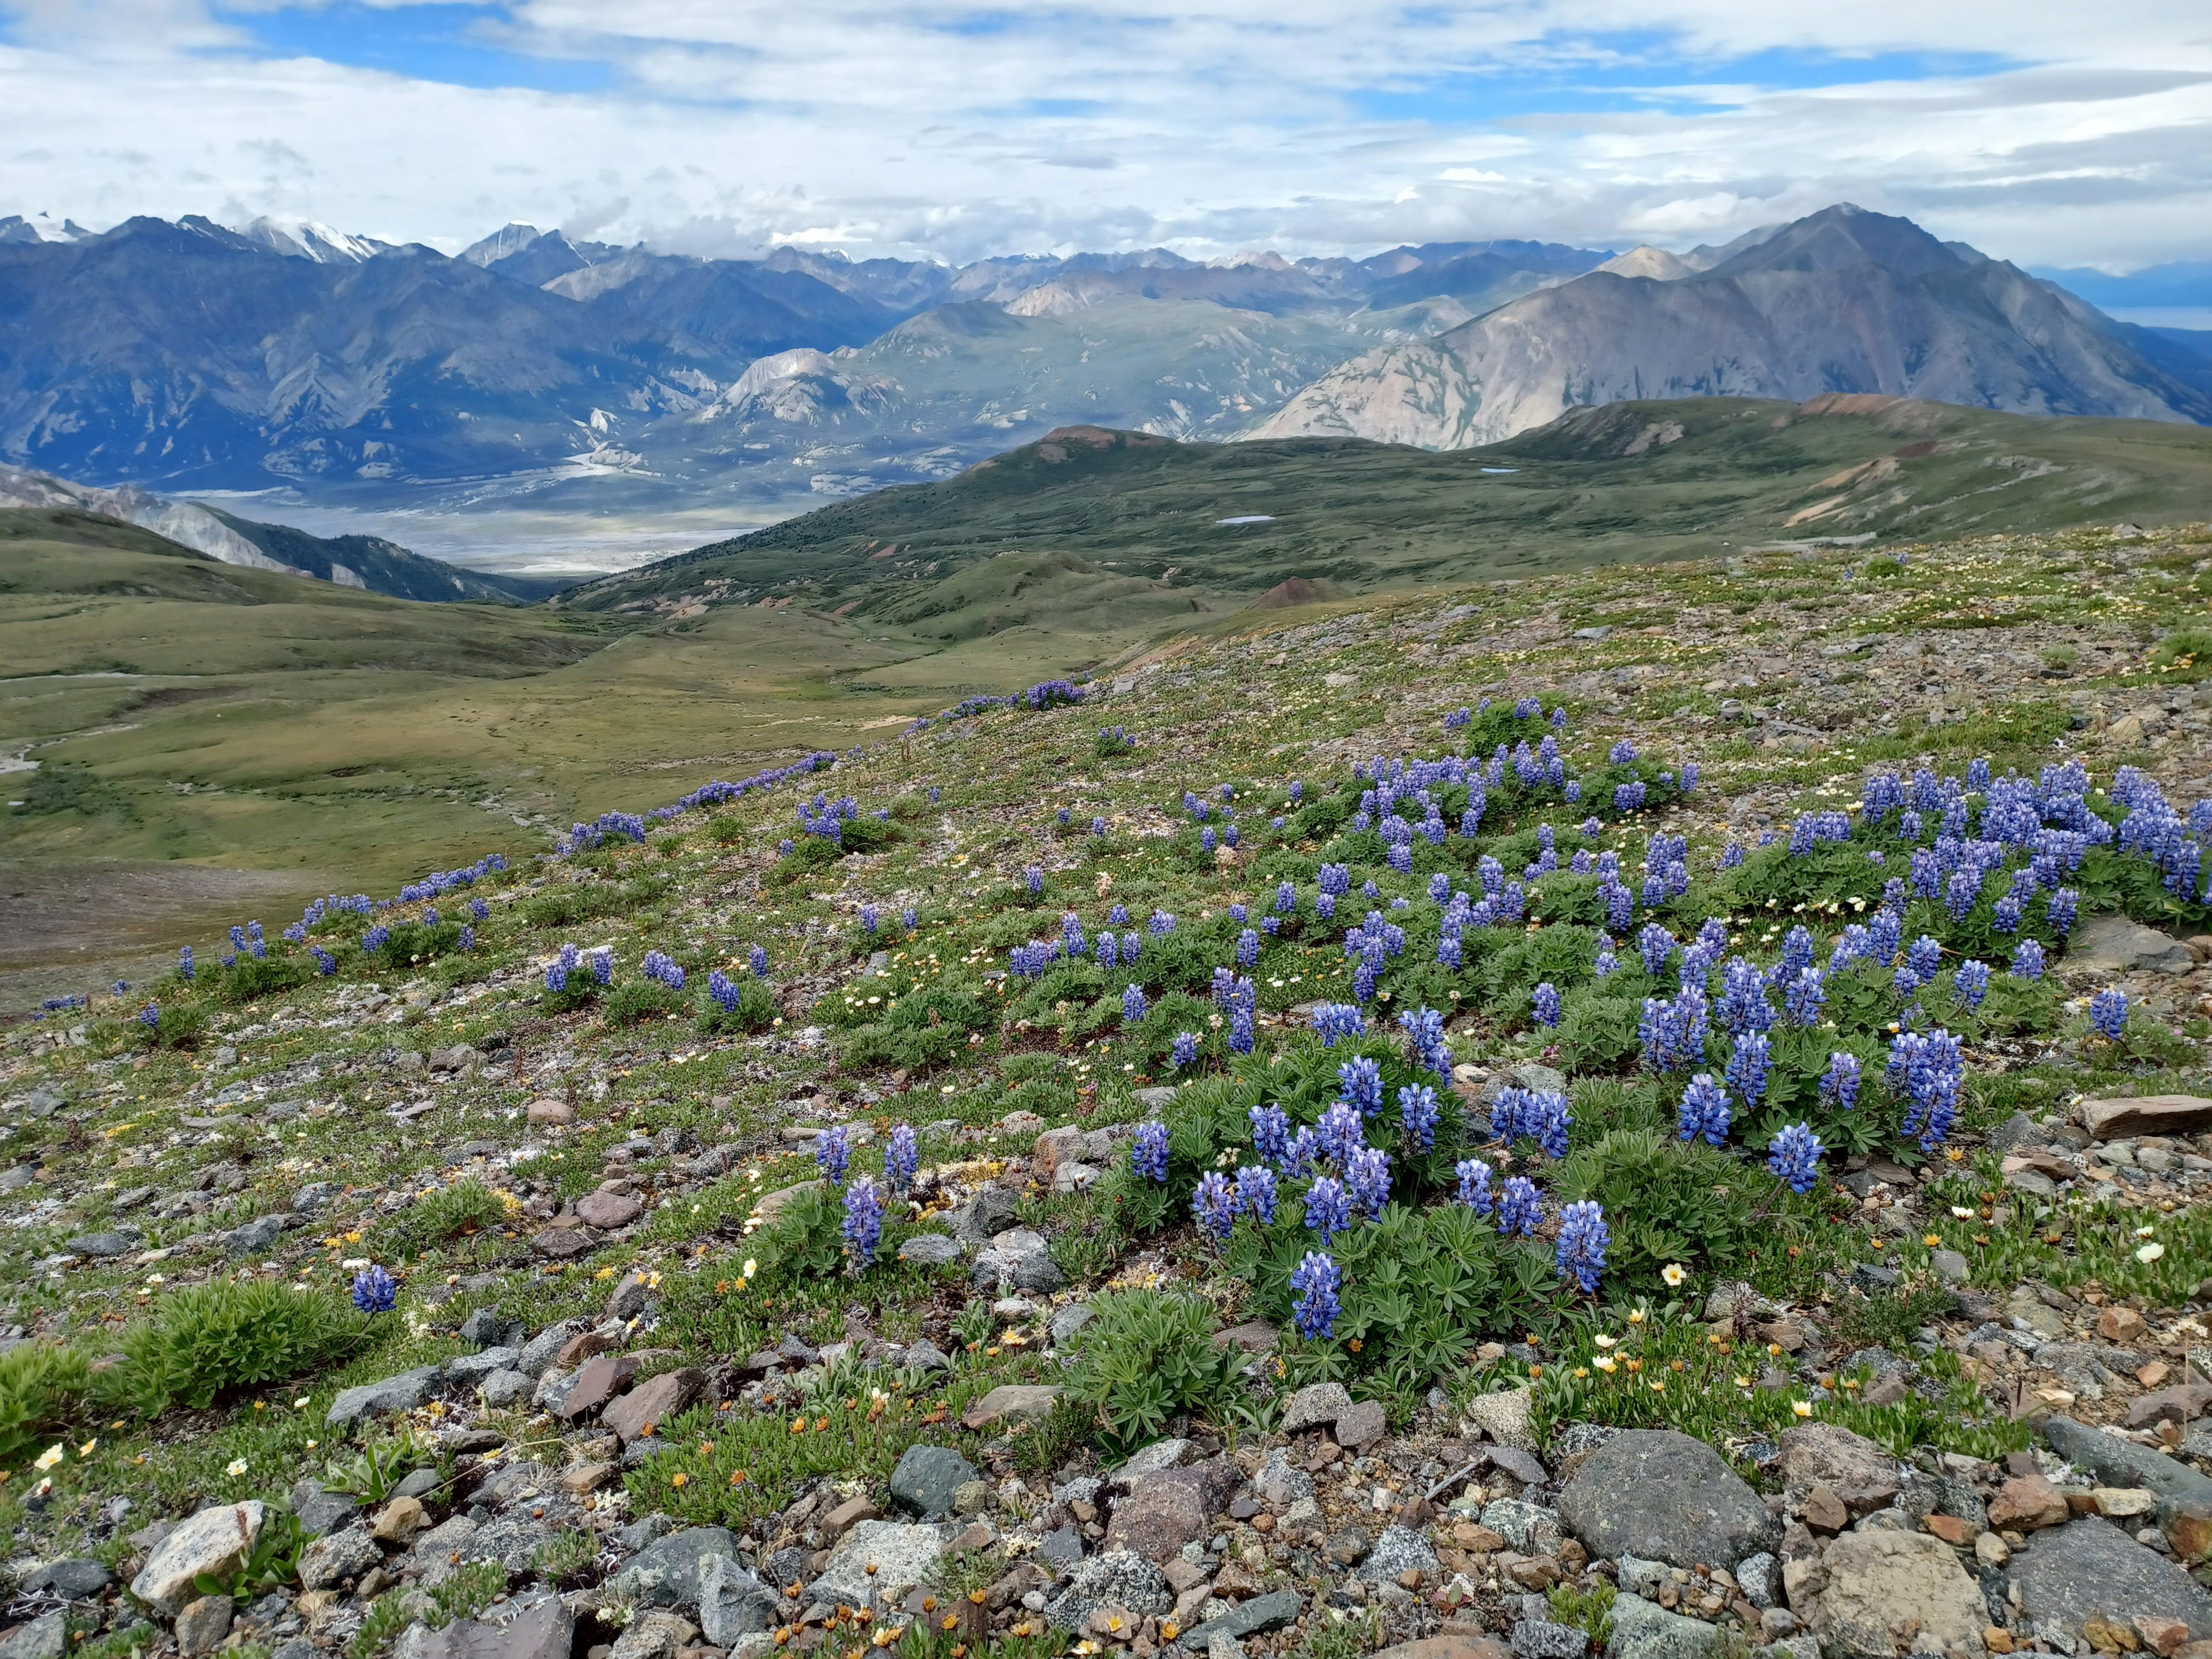 The top of a mountain in the Yukon, overlooking Ä'äy Chù in Kluane National Park. There are blue flowers on top of the mountain and in the distance are mountains and a lake.